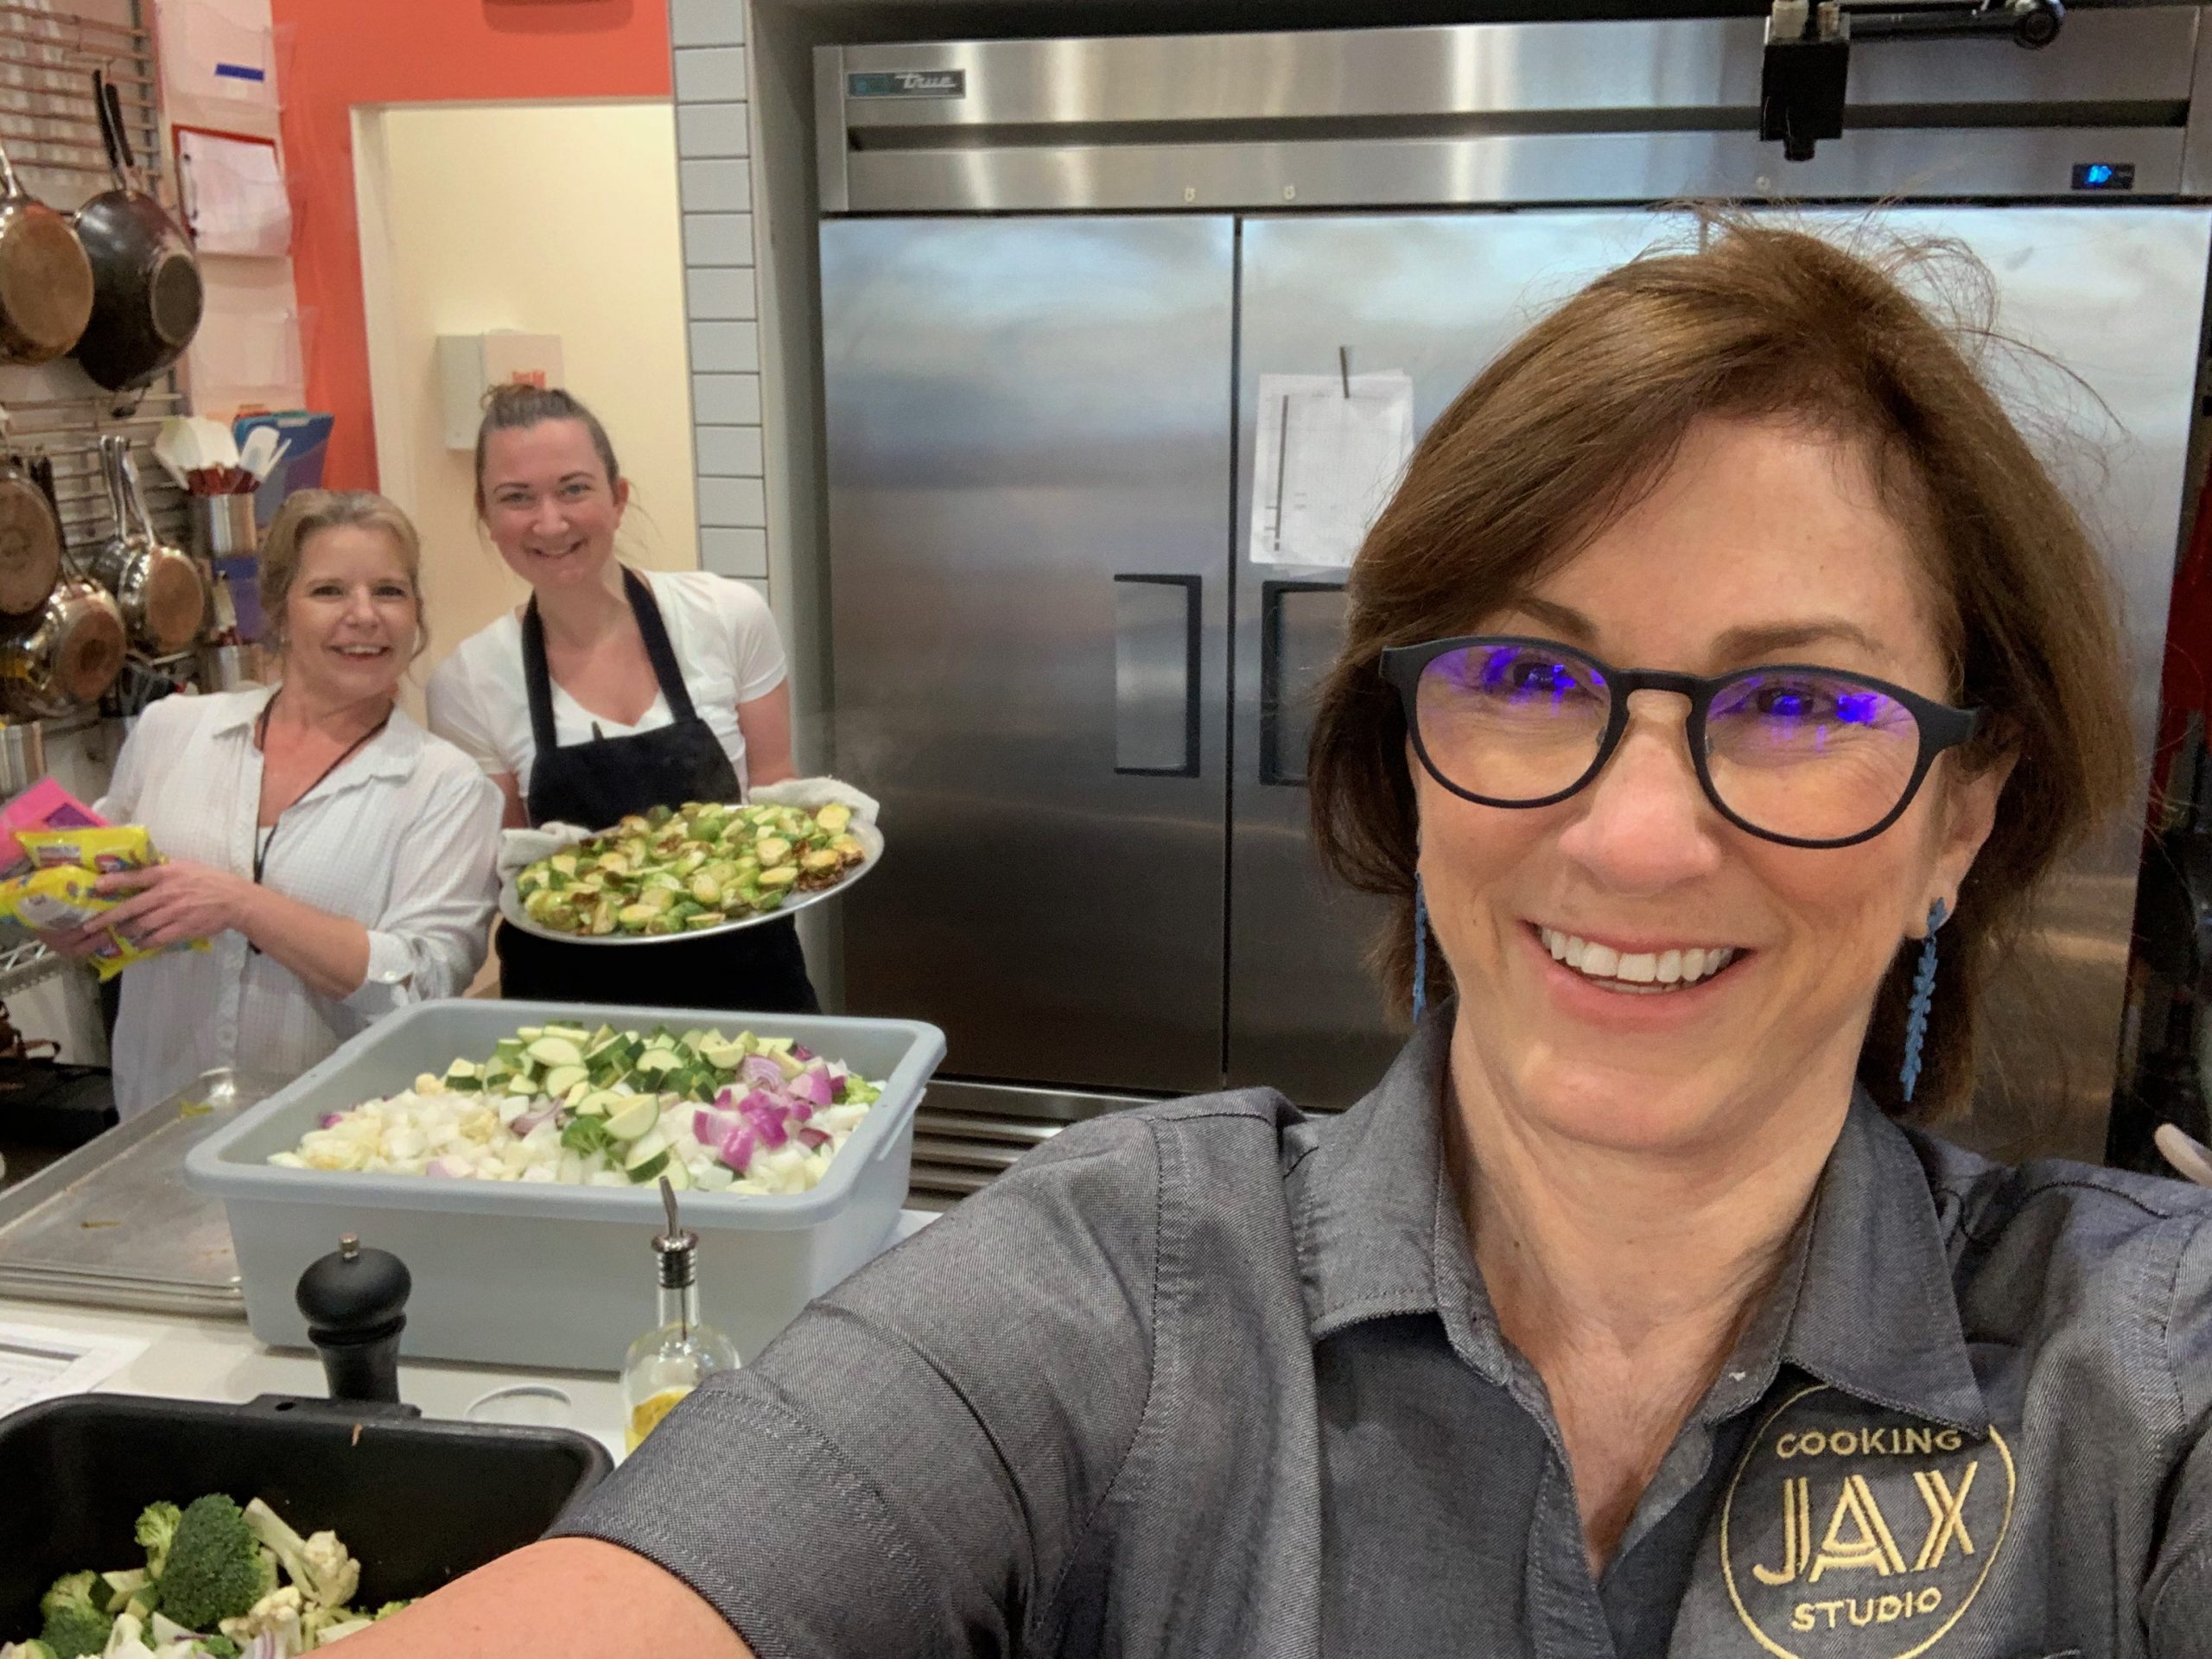 A selfie from the angle of Terri, owner of JAX Cooking Studio. Two female employees prepare food in the background.